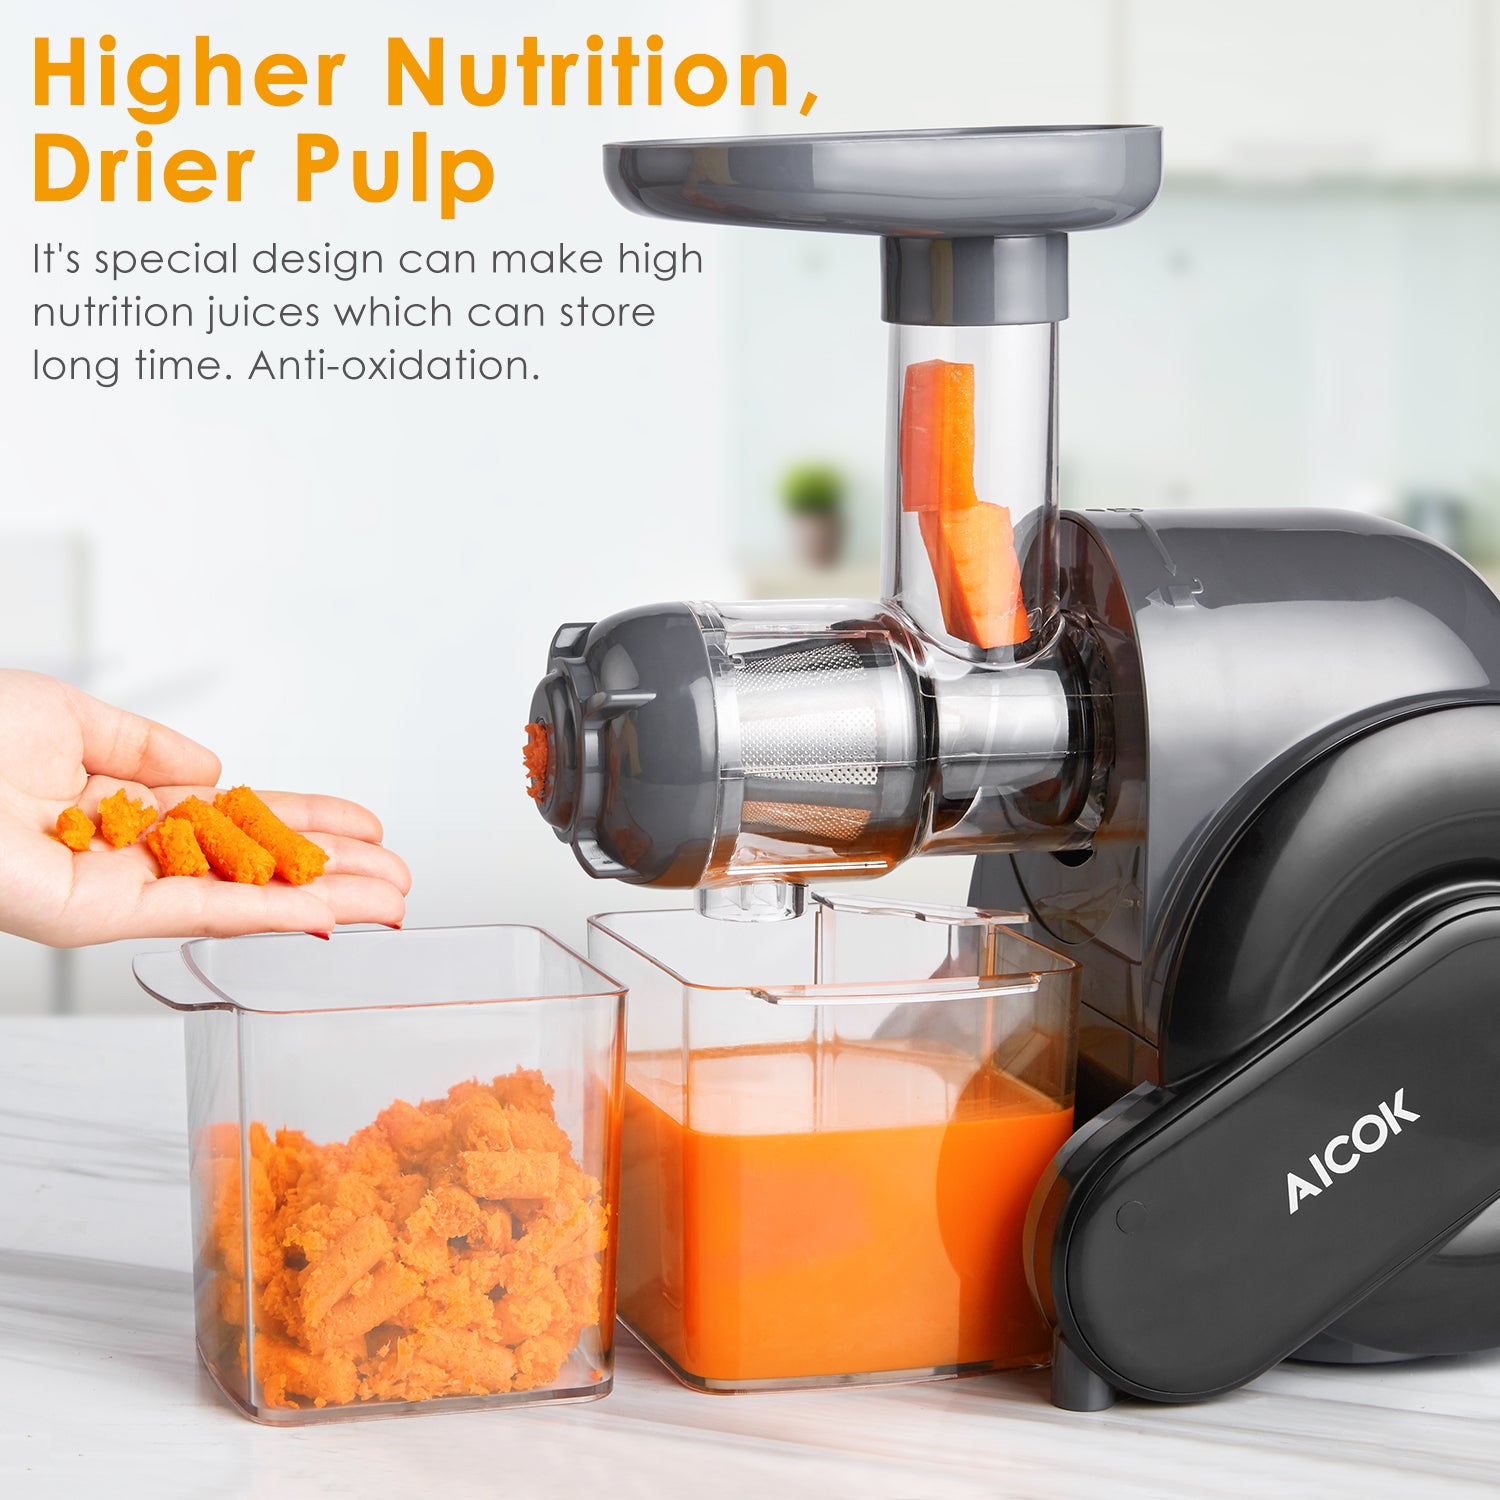 AICOK-Juicer, Masticating Juice Extractor Cold Press Juicer 519, high nutrition juices, healthy diet, fruit juicer professional